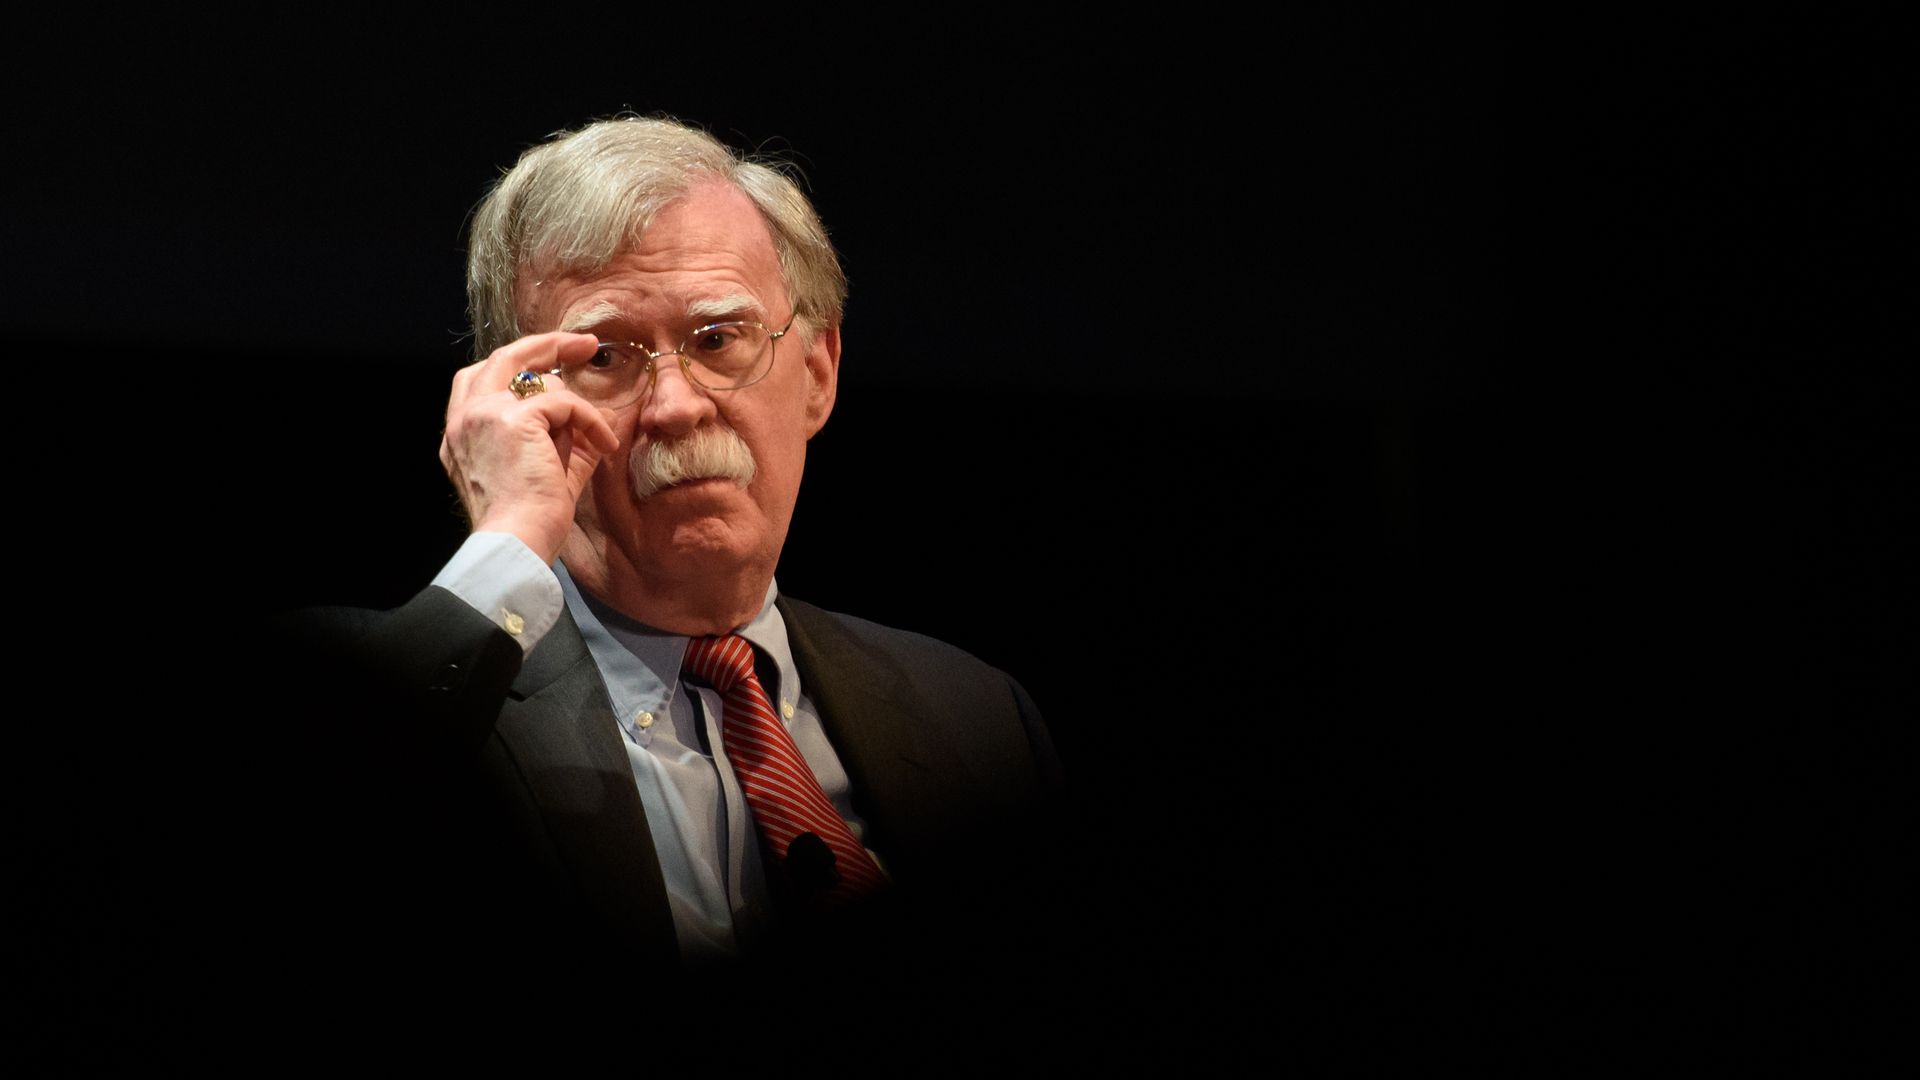  Former National Security Adviser John Boltonduring a forum at the Page Auditorium on the campus of Duke University on February 17, 2020 in Durham, North Carolina. 